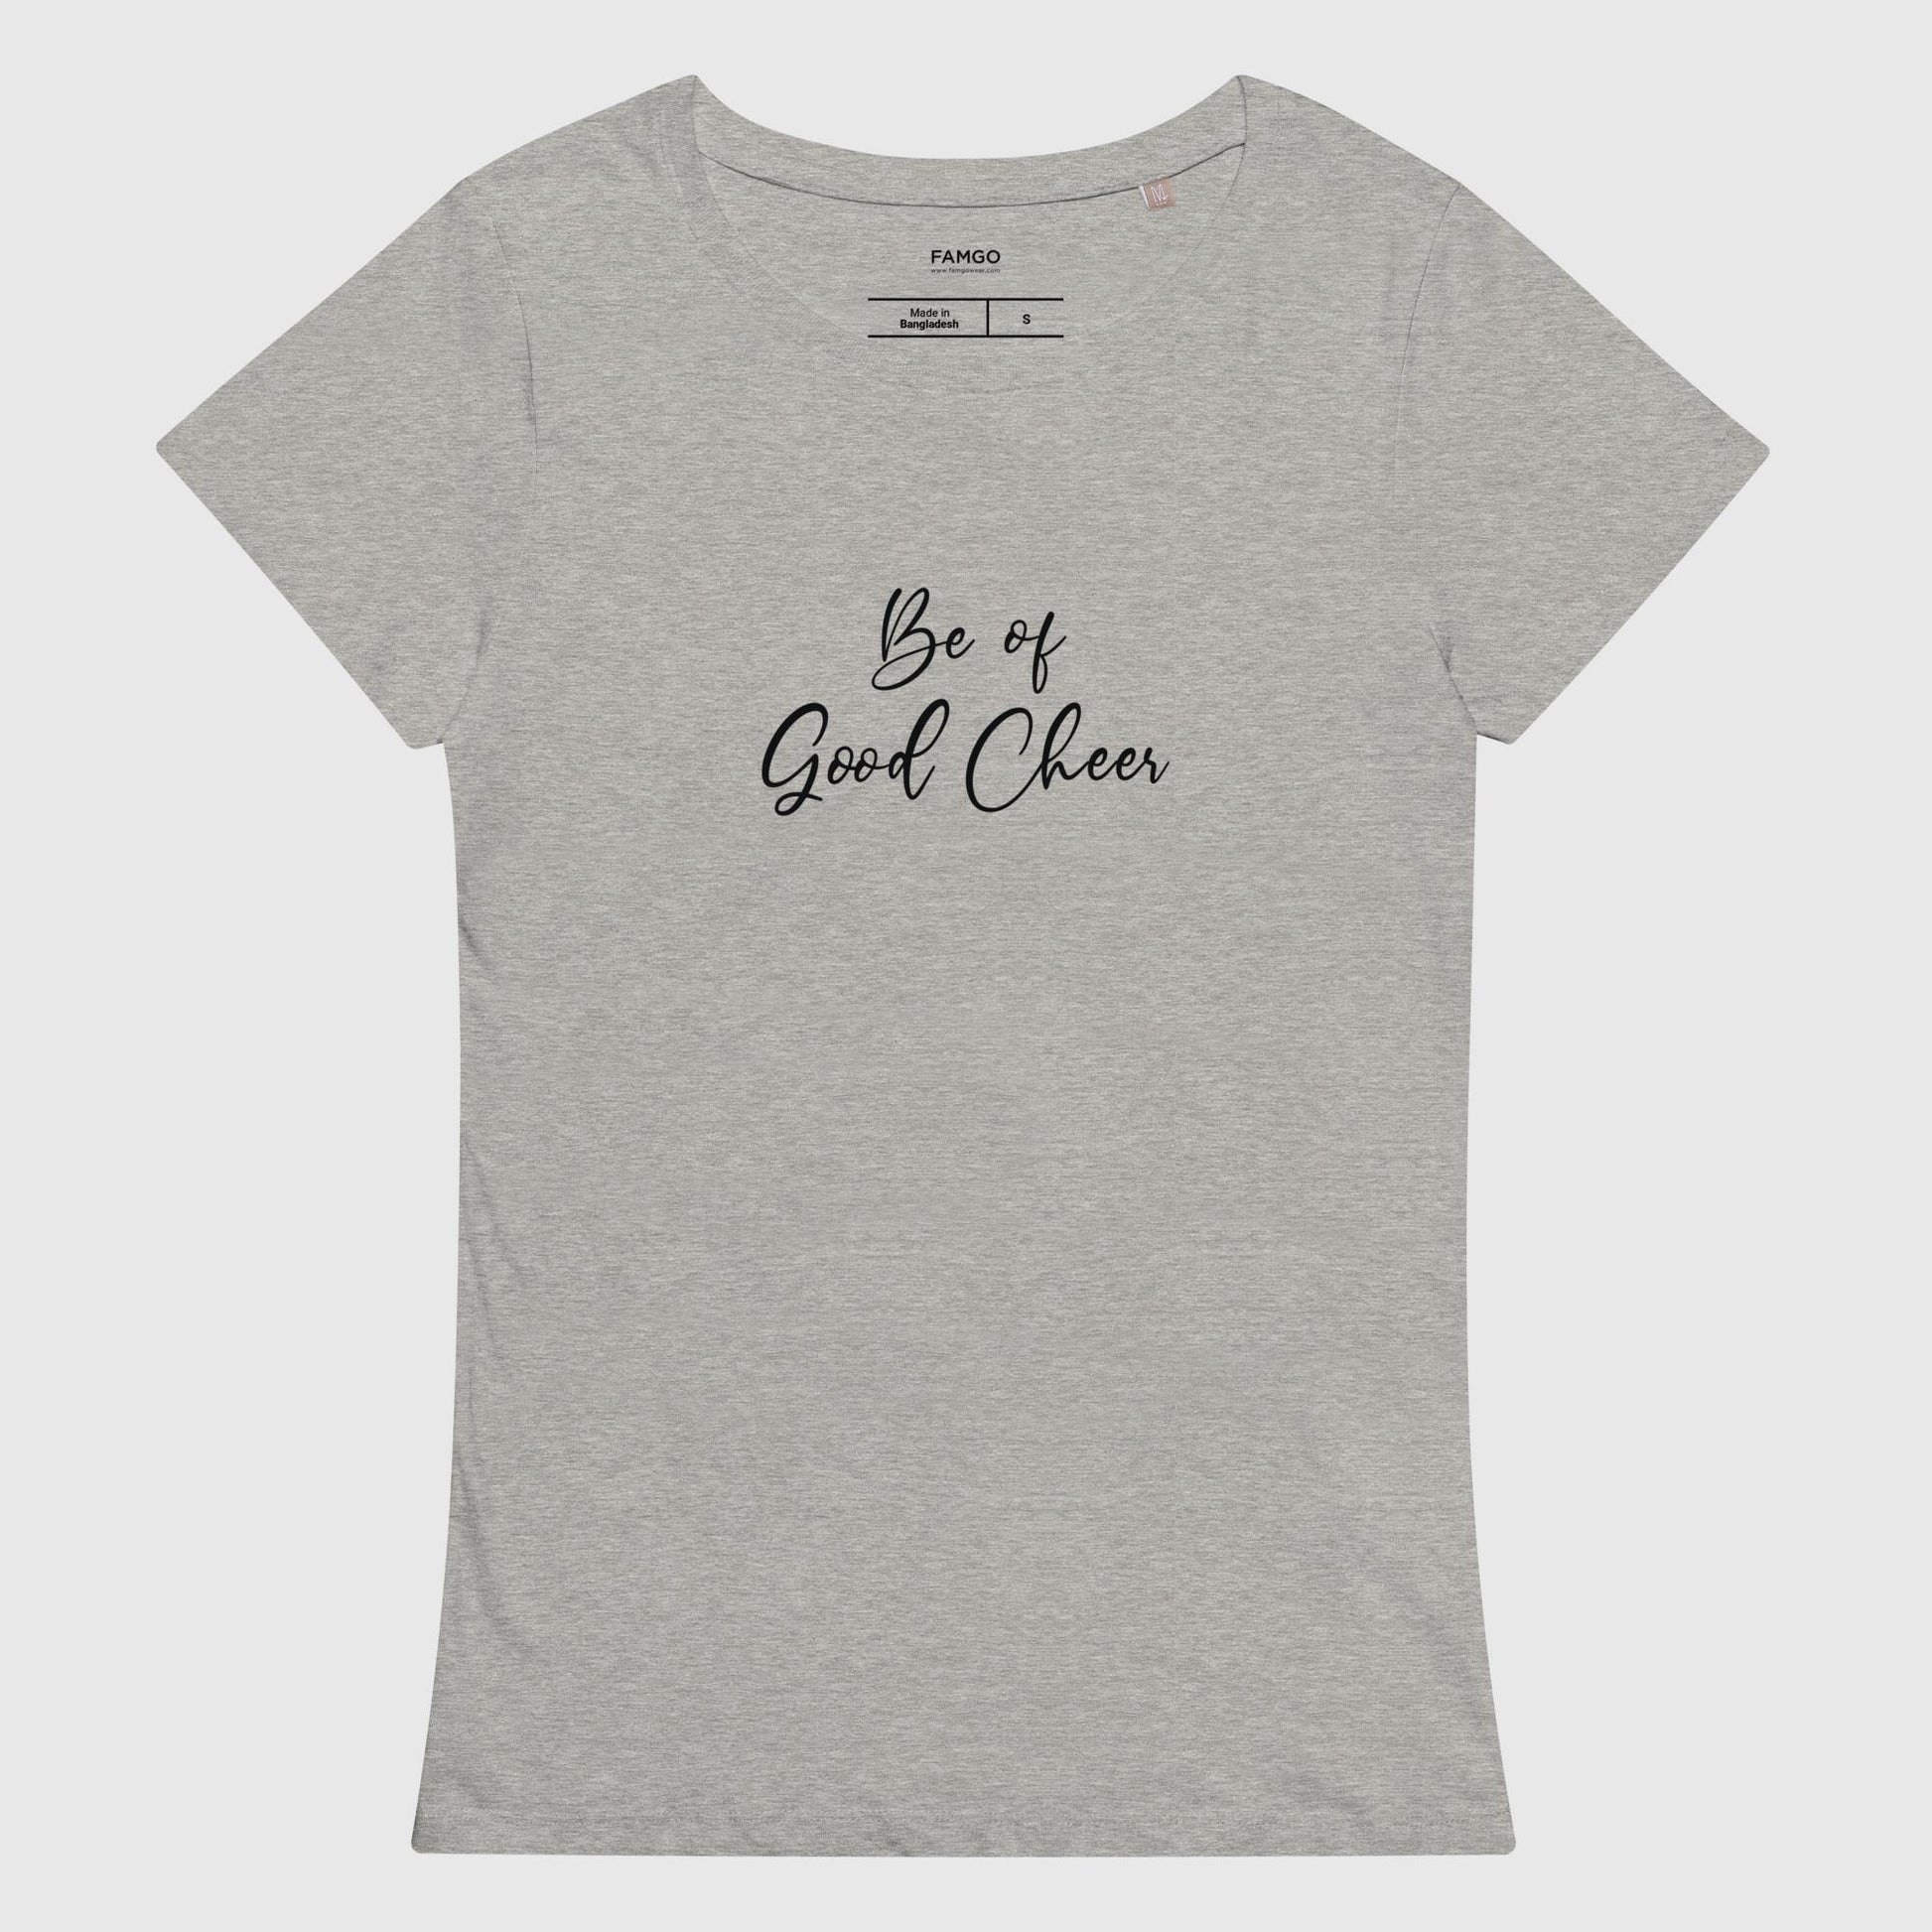 Women's gray melange organic cotton t-shirt that features the positive quote, "Be of Good Cheer."